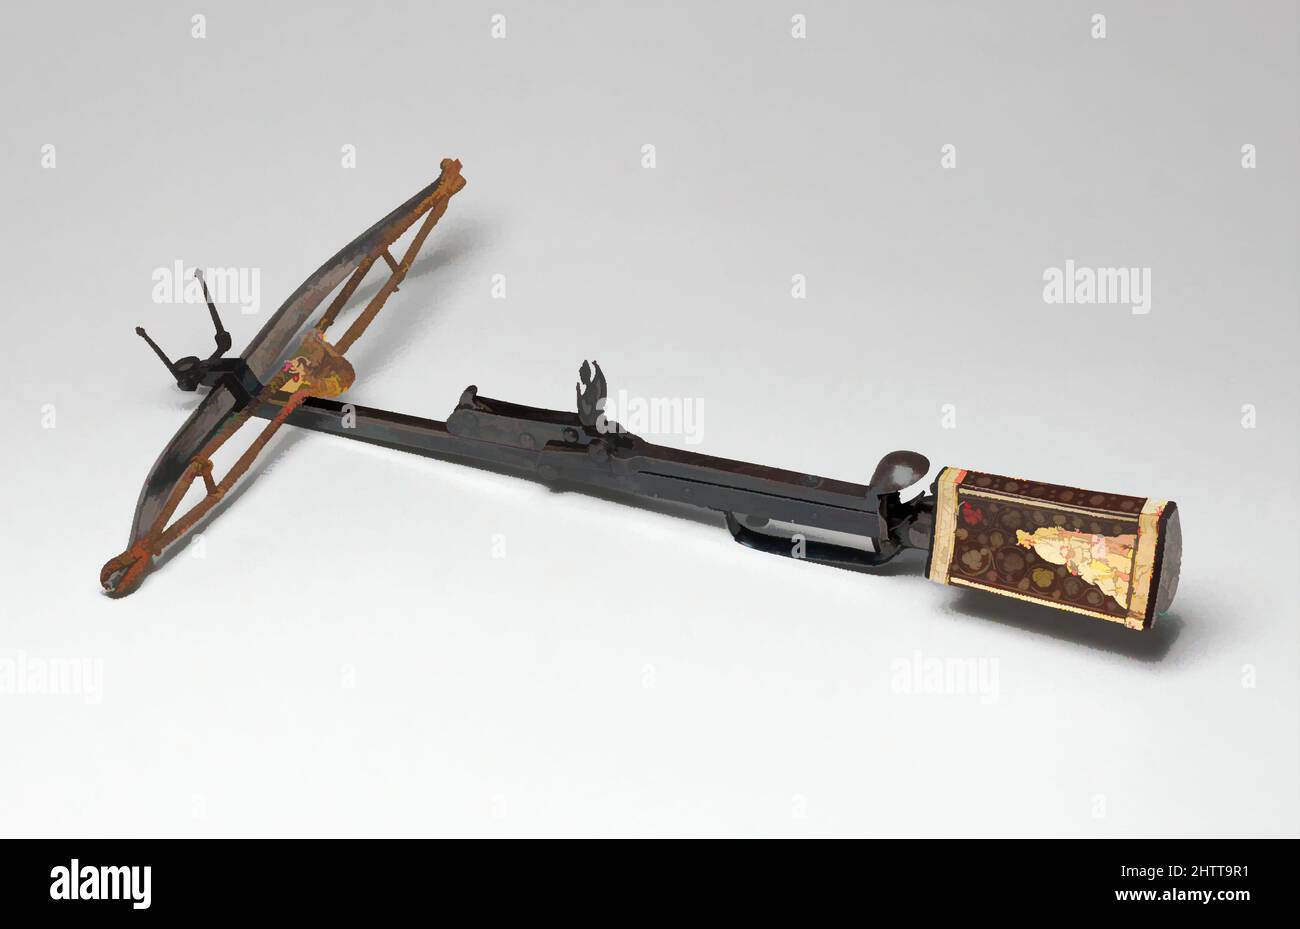 Art inspired by Pellet Crossbow, ca. 1600–1650, German, Steel, wood, staghorn, hemp, leather, L. 26 7/8 in. (68.2 cm); W. 17 3/8 in. (44.1 cm); Wt. 5 lb. 1 oz. (2,302 g), Archery Equipment-Crossbows, Classic works modernized by Artotop with a splash of modernity. Shapes, color and value, eye-catching visual impact on art. Emotions through freedom of artworks in a contemporary way. A timeless message pursuing a wildly creative new direction. Artists turning to the digital medium and creating the Artotop NFT Stock Photo